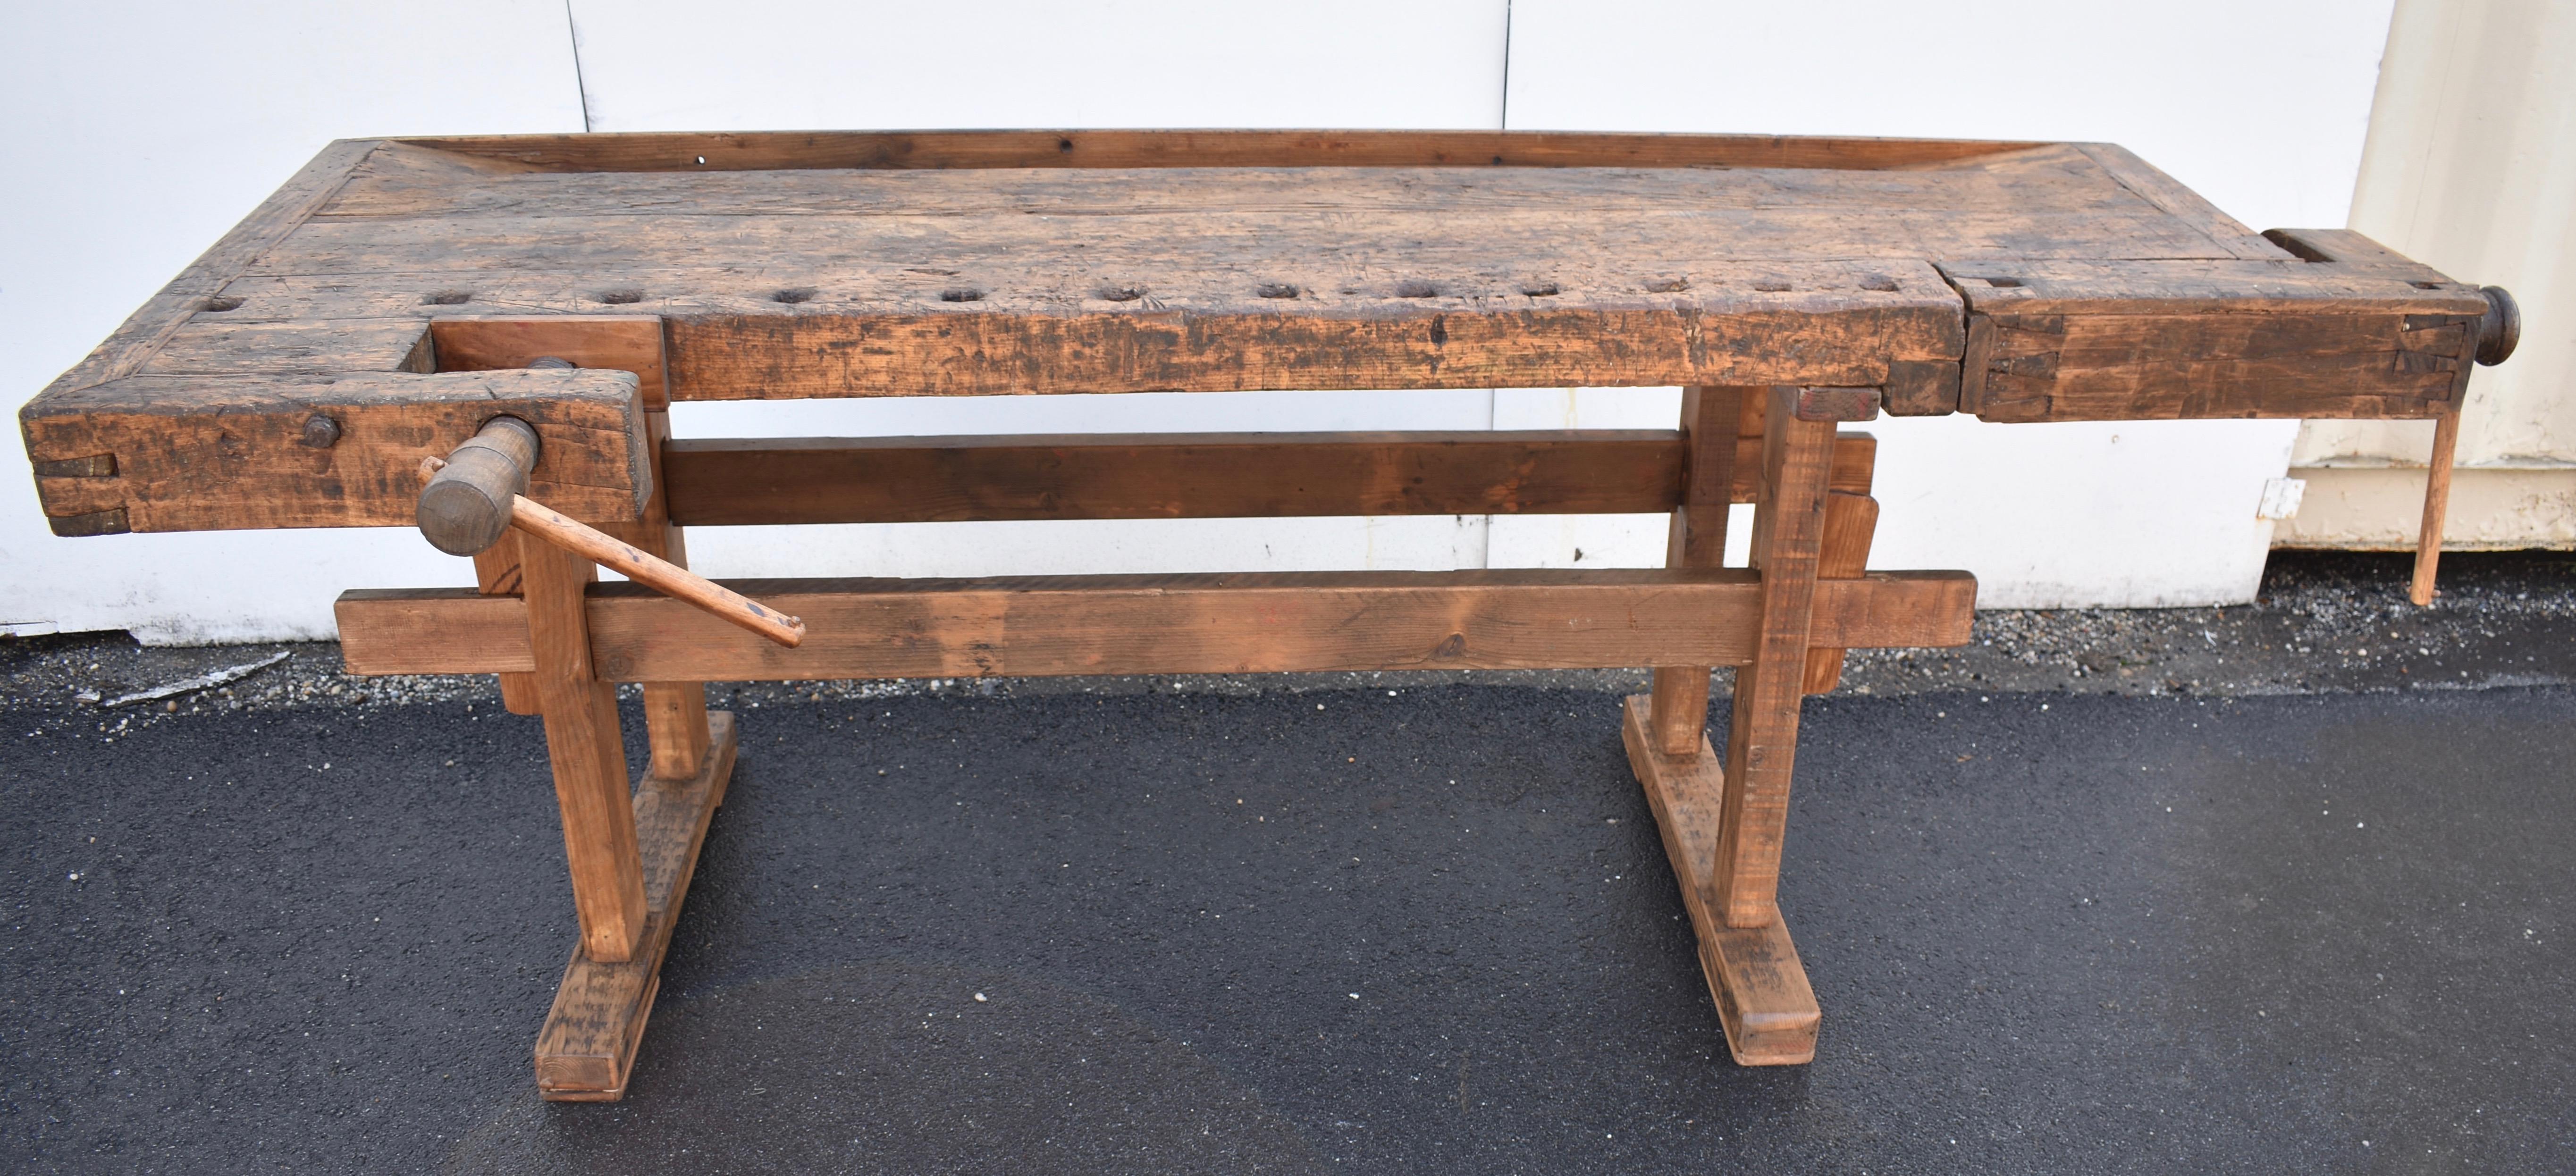 This is a beautifully chopped and gnarled carpenter’s workbench. 
The trestle-style base is made of oak.  The uprights are hand-cut, through-tenoned and pegged top and bottom to the horizontal members. The trestles are joined by two 2”x4”